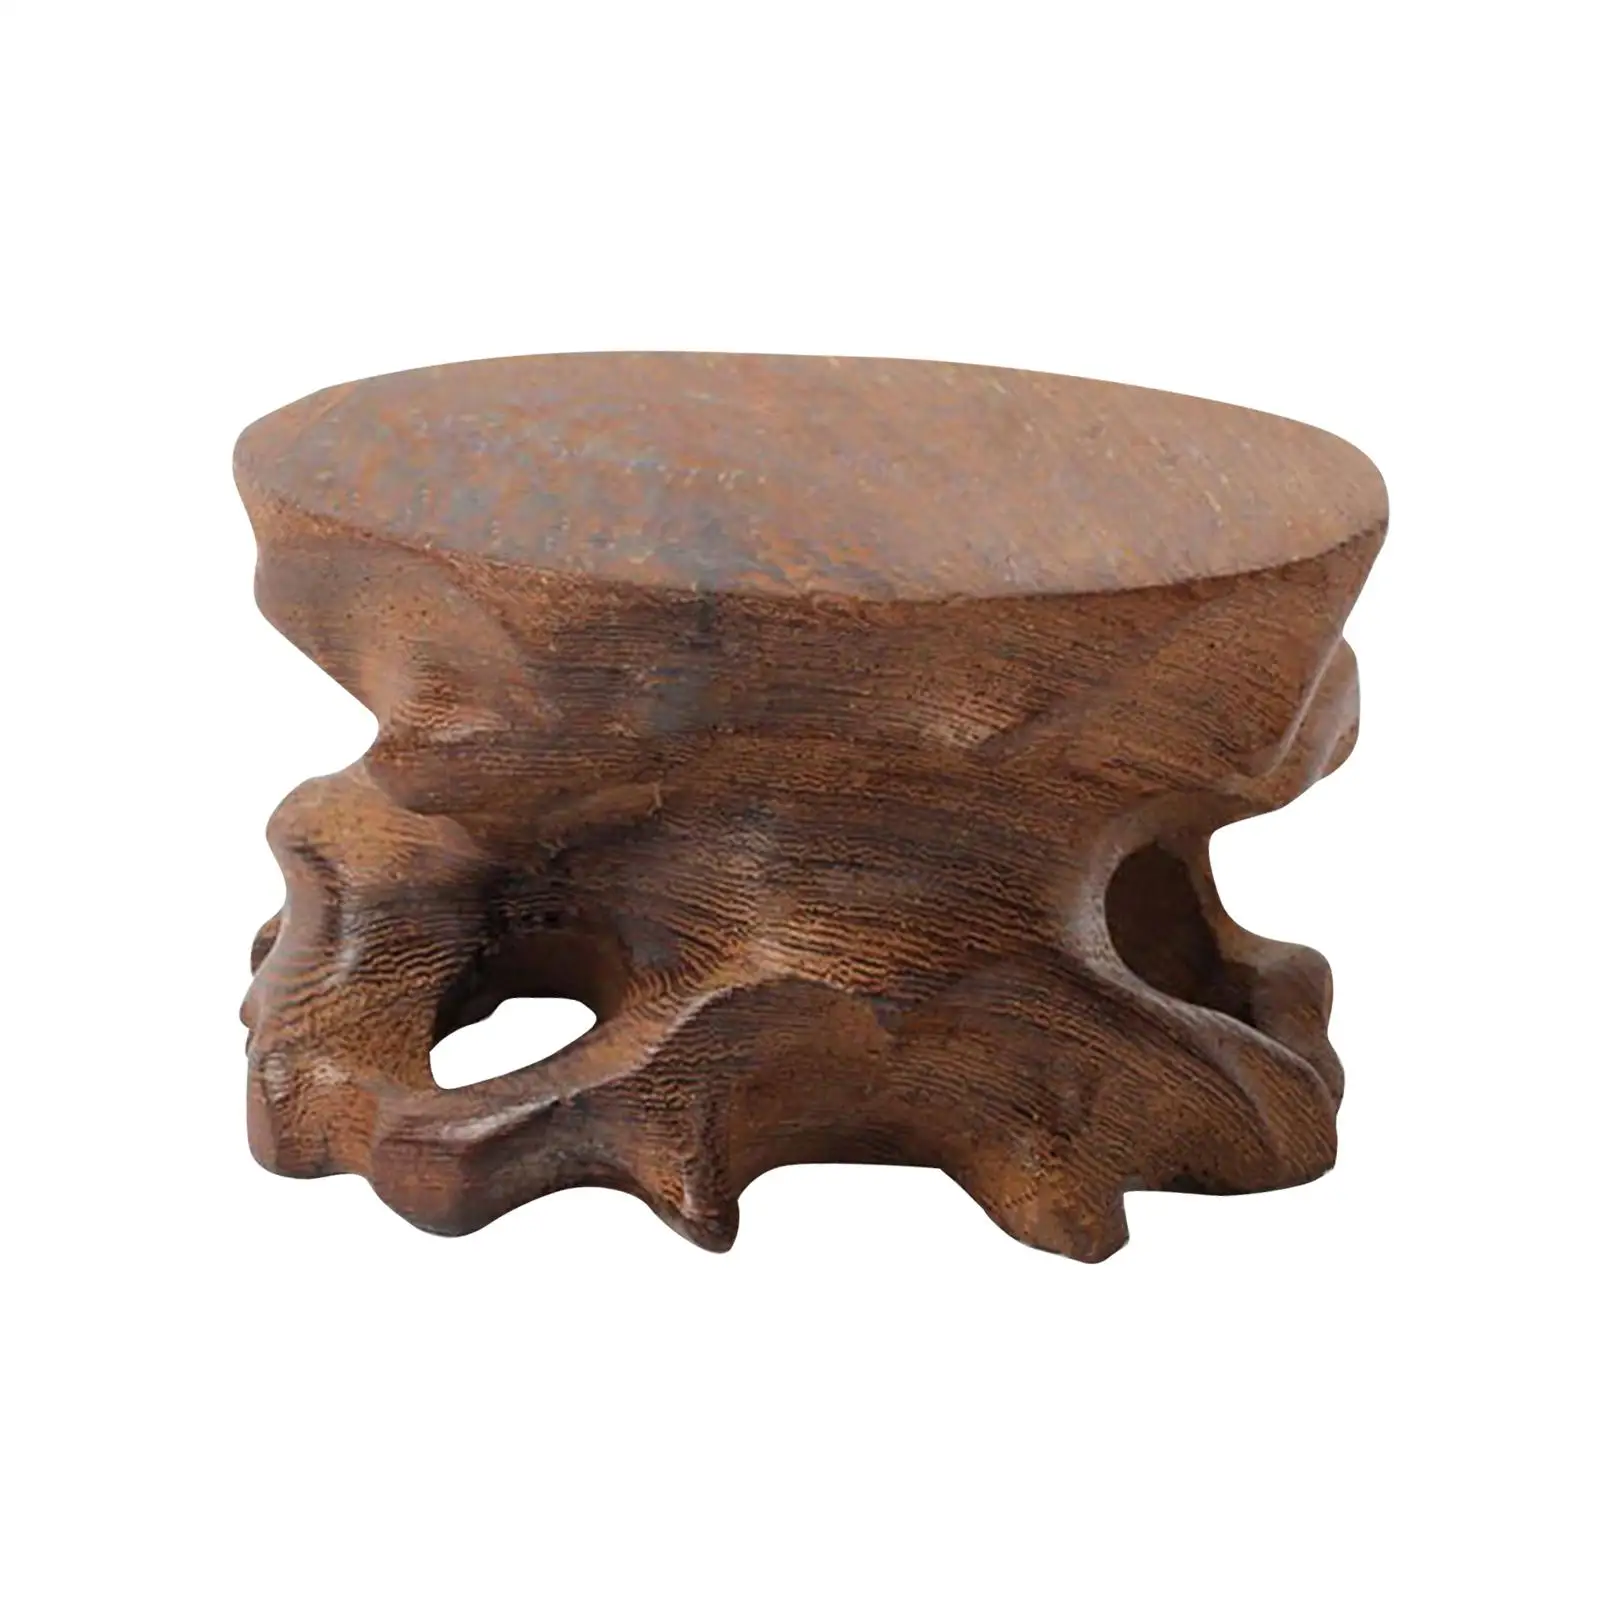 Wooden Stone Display Stand Artware Holder Wood Carving Collectibles Ornament Circular Wooden Base for Desk Office Home Bookshelf